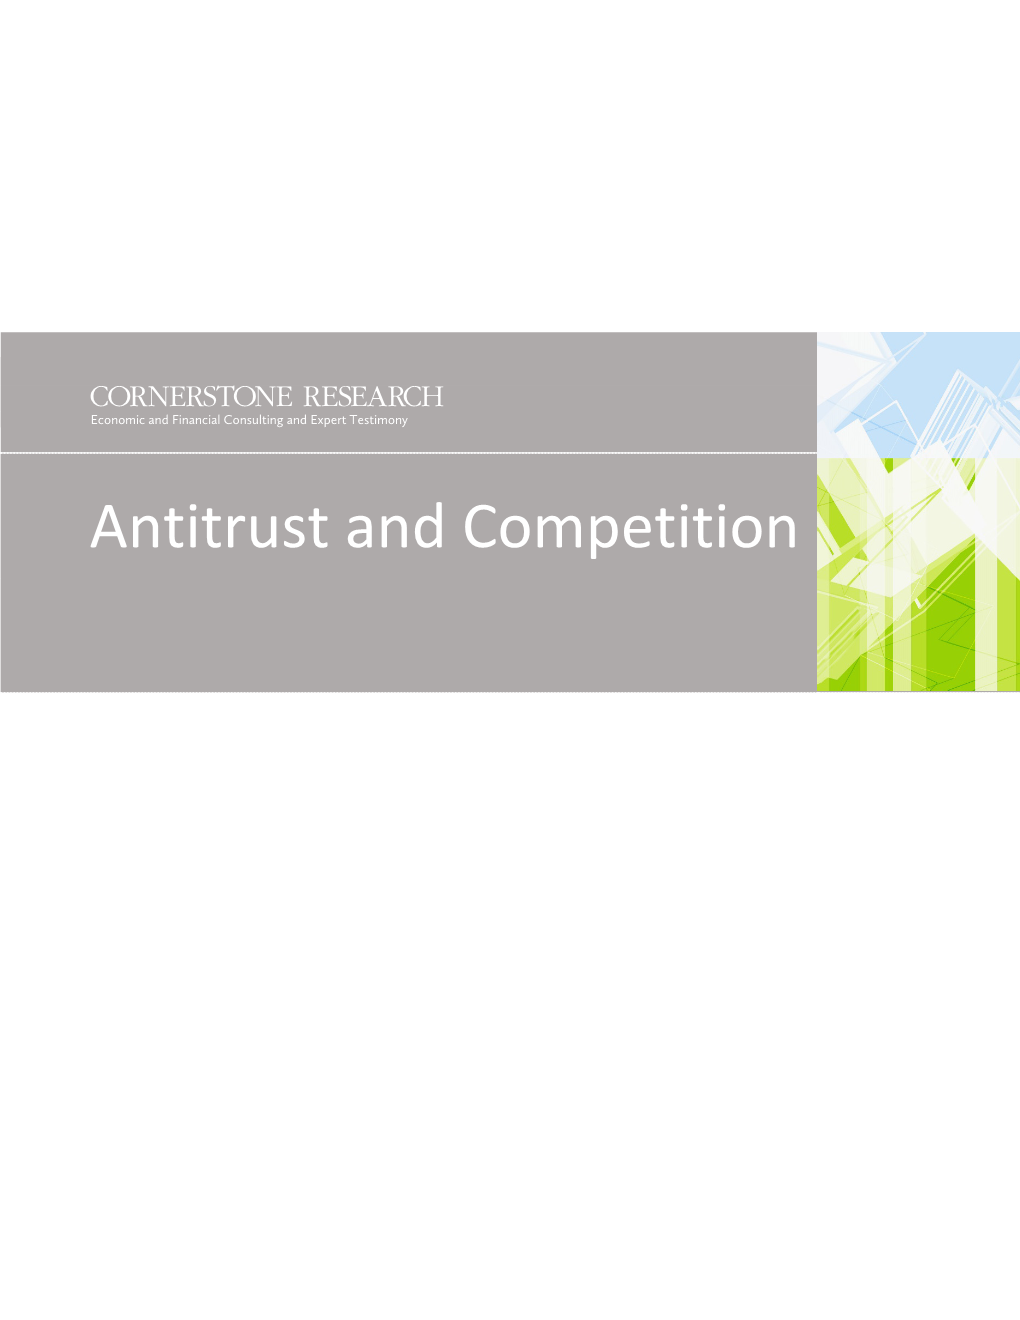 Cornerstone Research Antitrust and Competition Capabilities